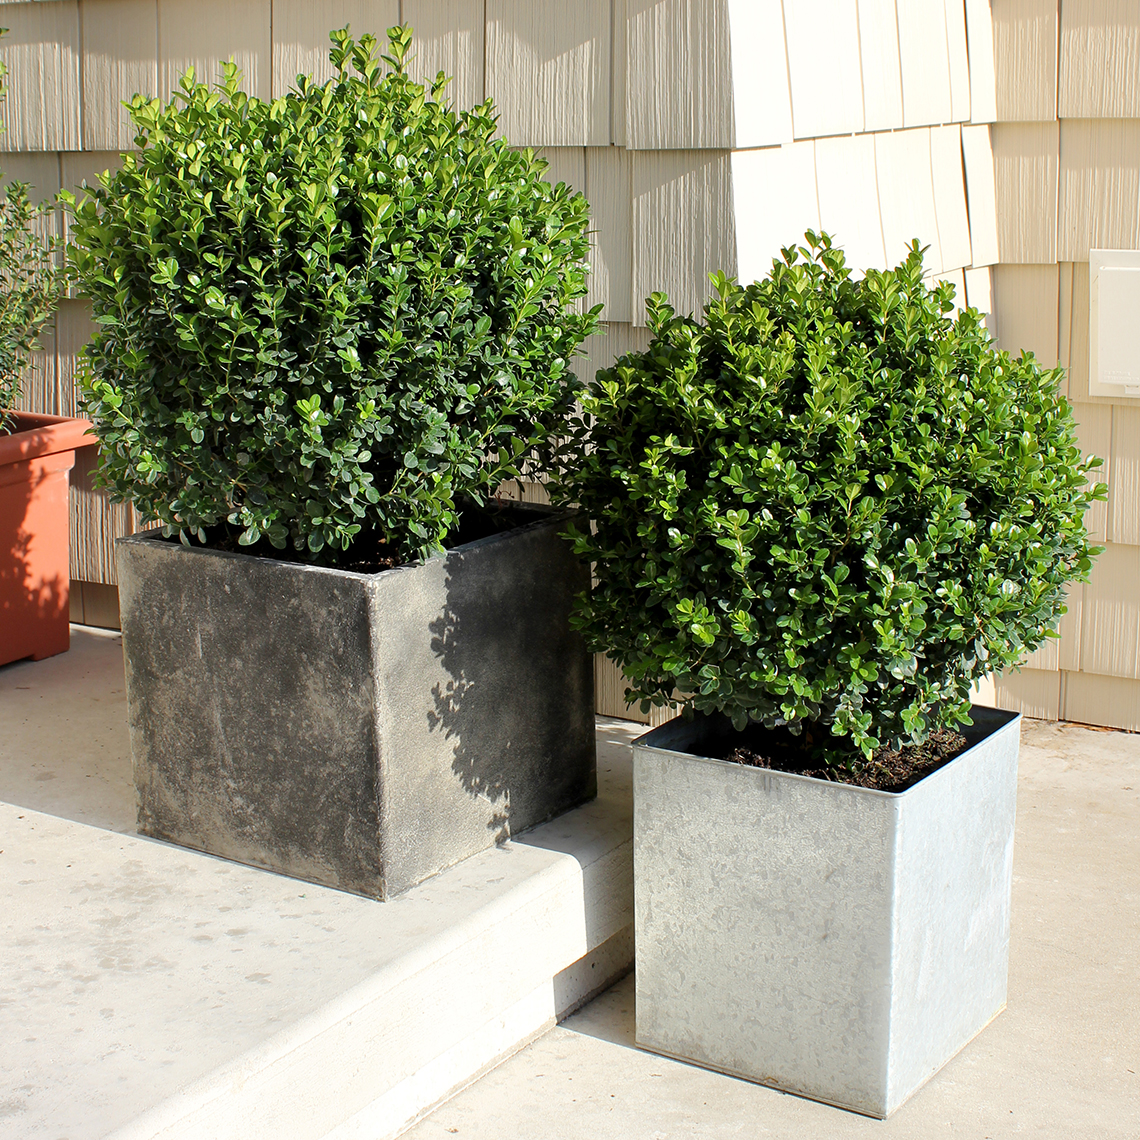 Pair of Sprinter Buxus in decorative metal containers on porch